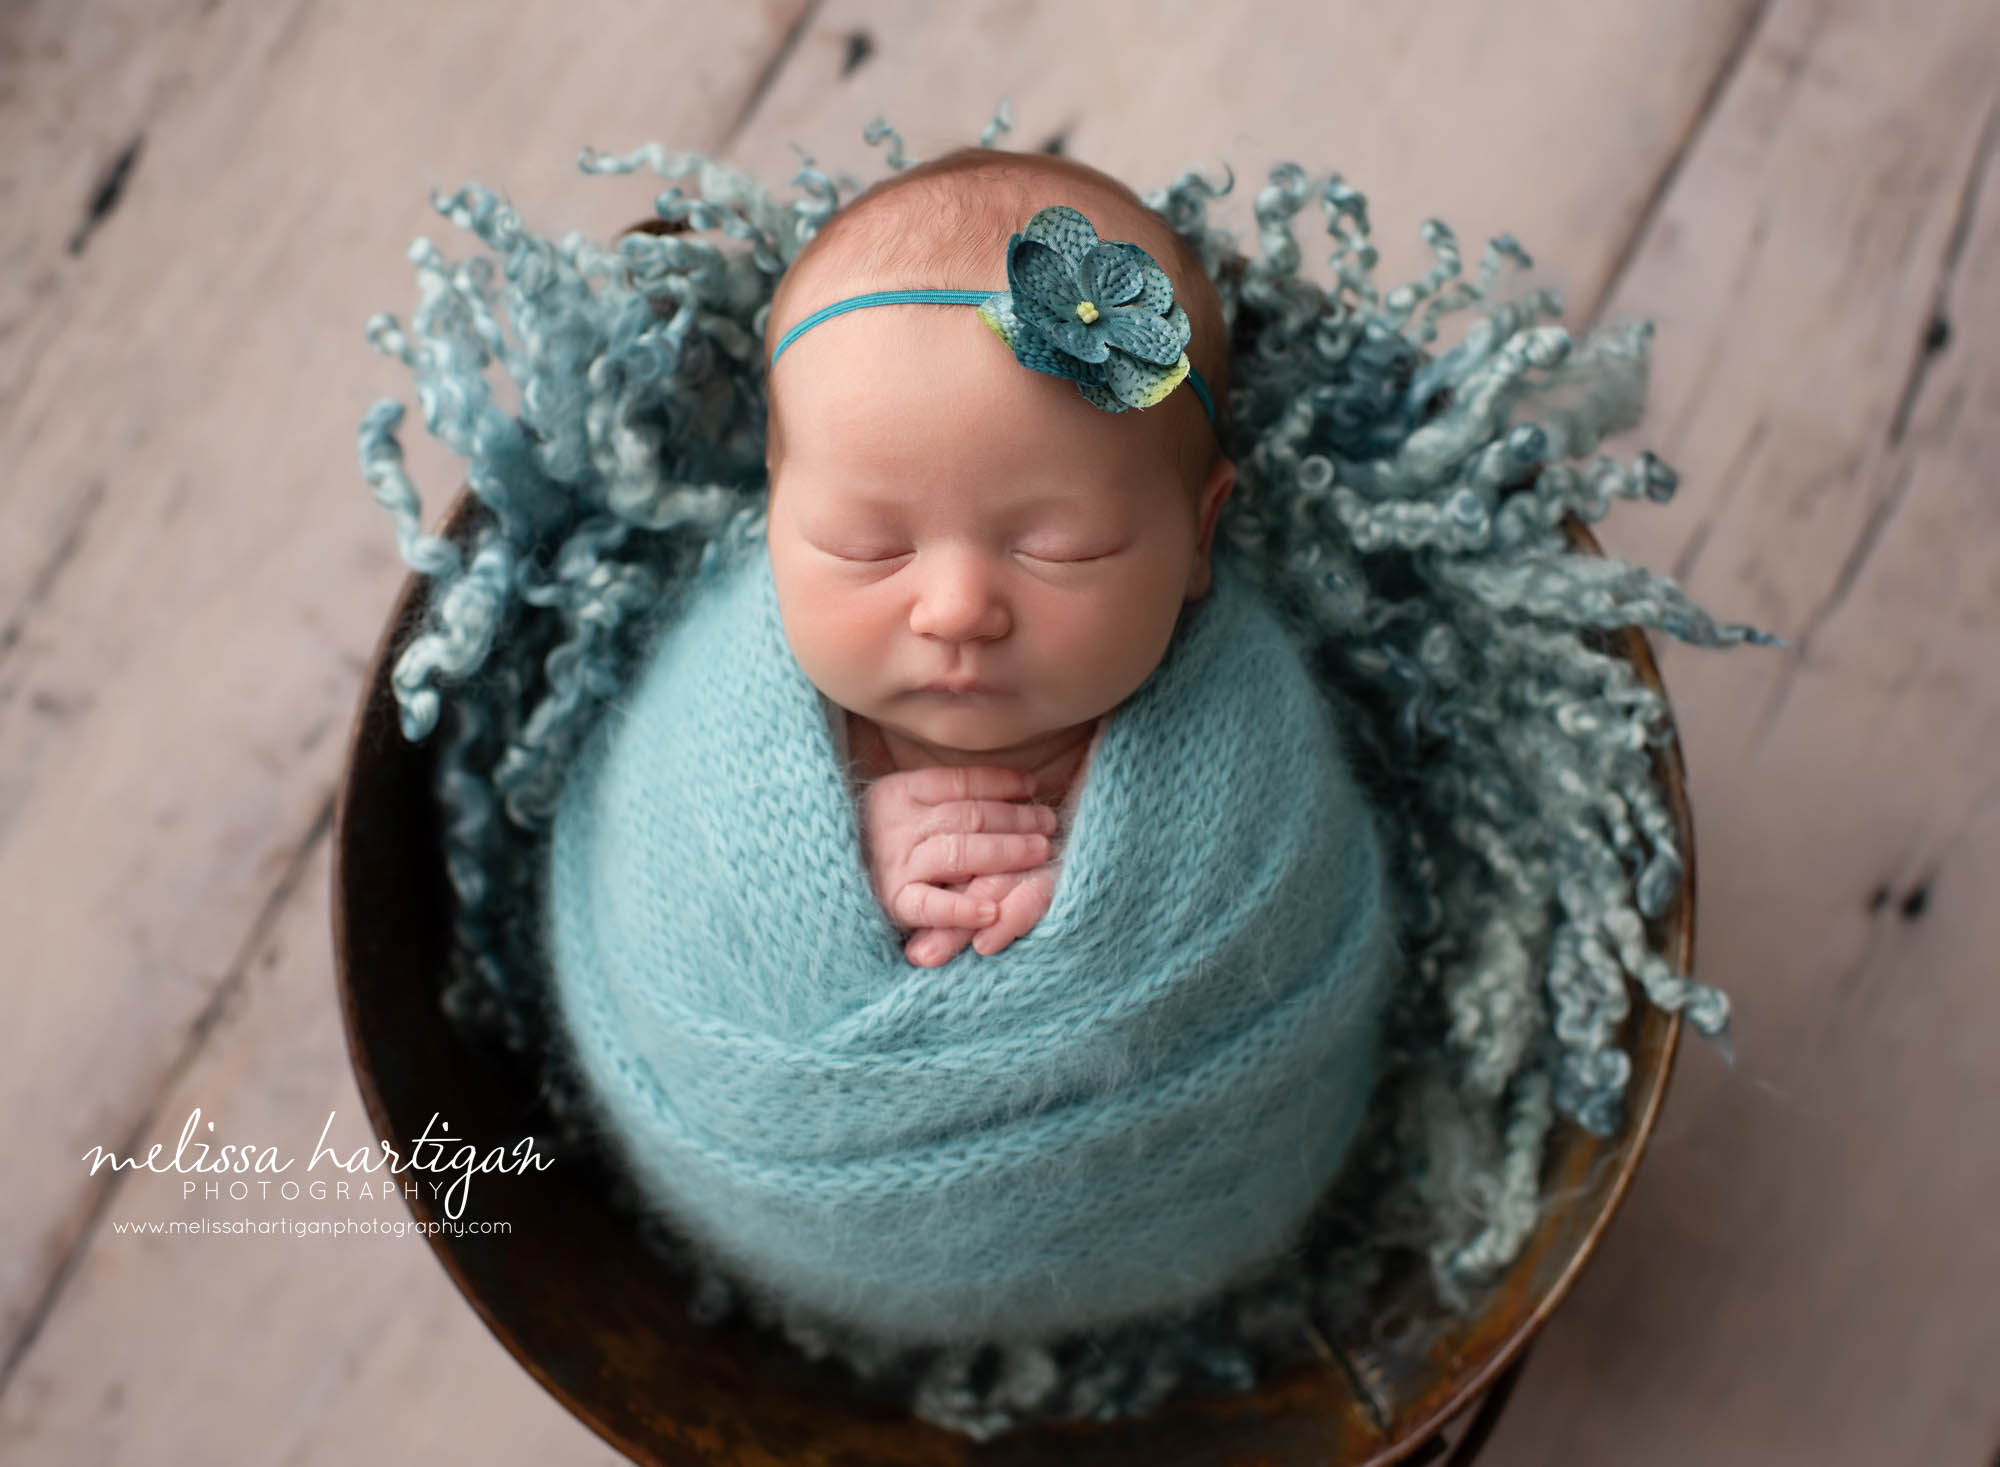 baby girl posed in bucket on her back with teal colored knitted wrap and teal colored curly layer CT baby photography